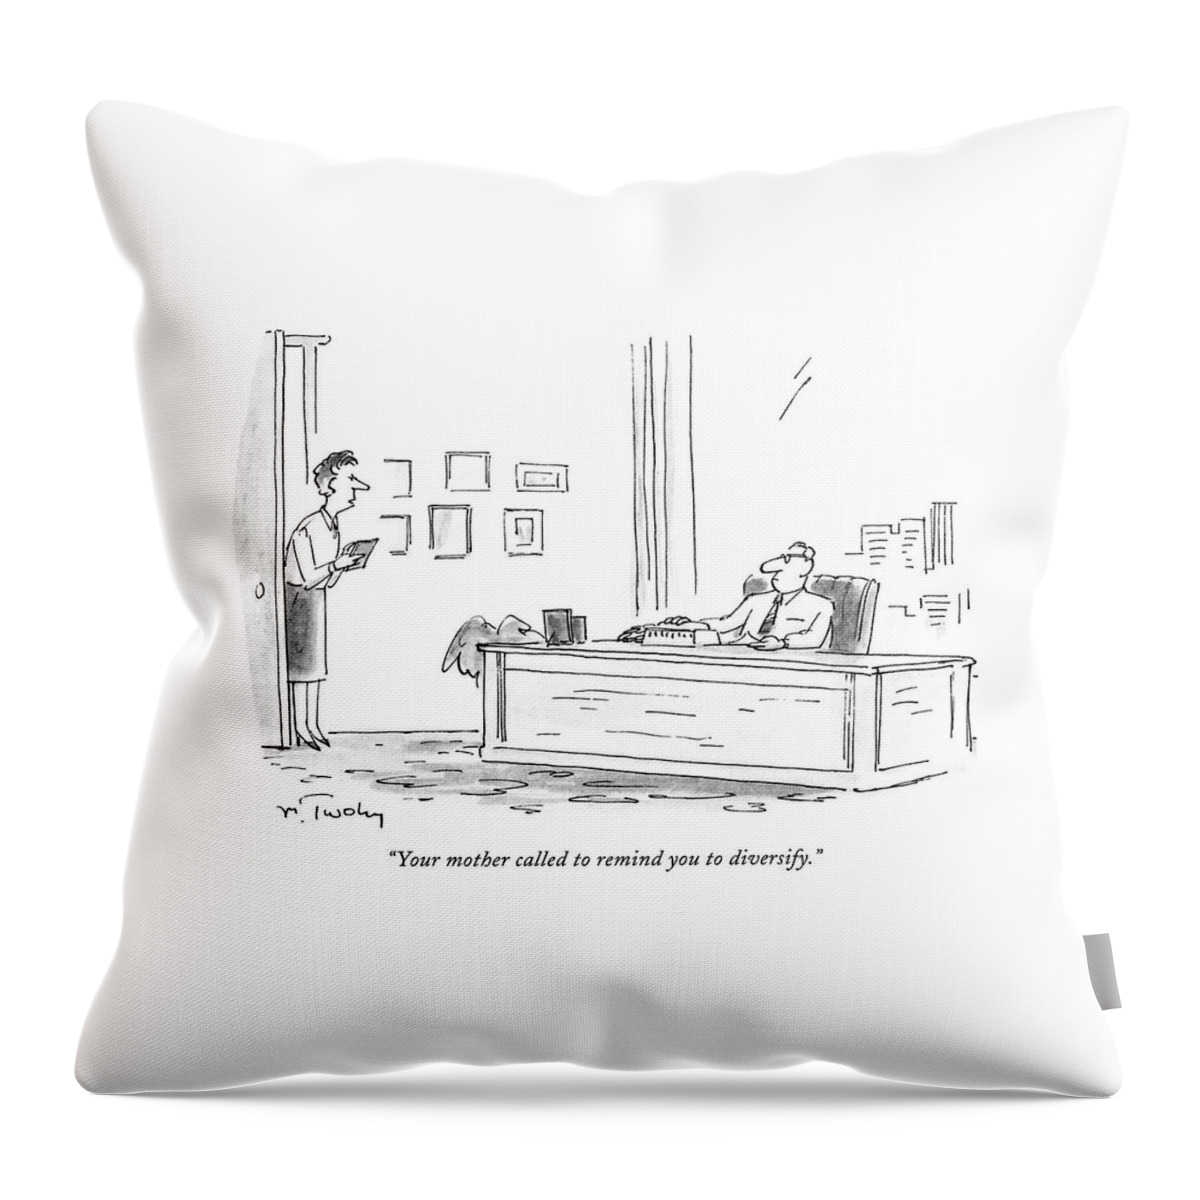 Your Mother Called To Remind You To Diversify Throw Pillow